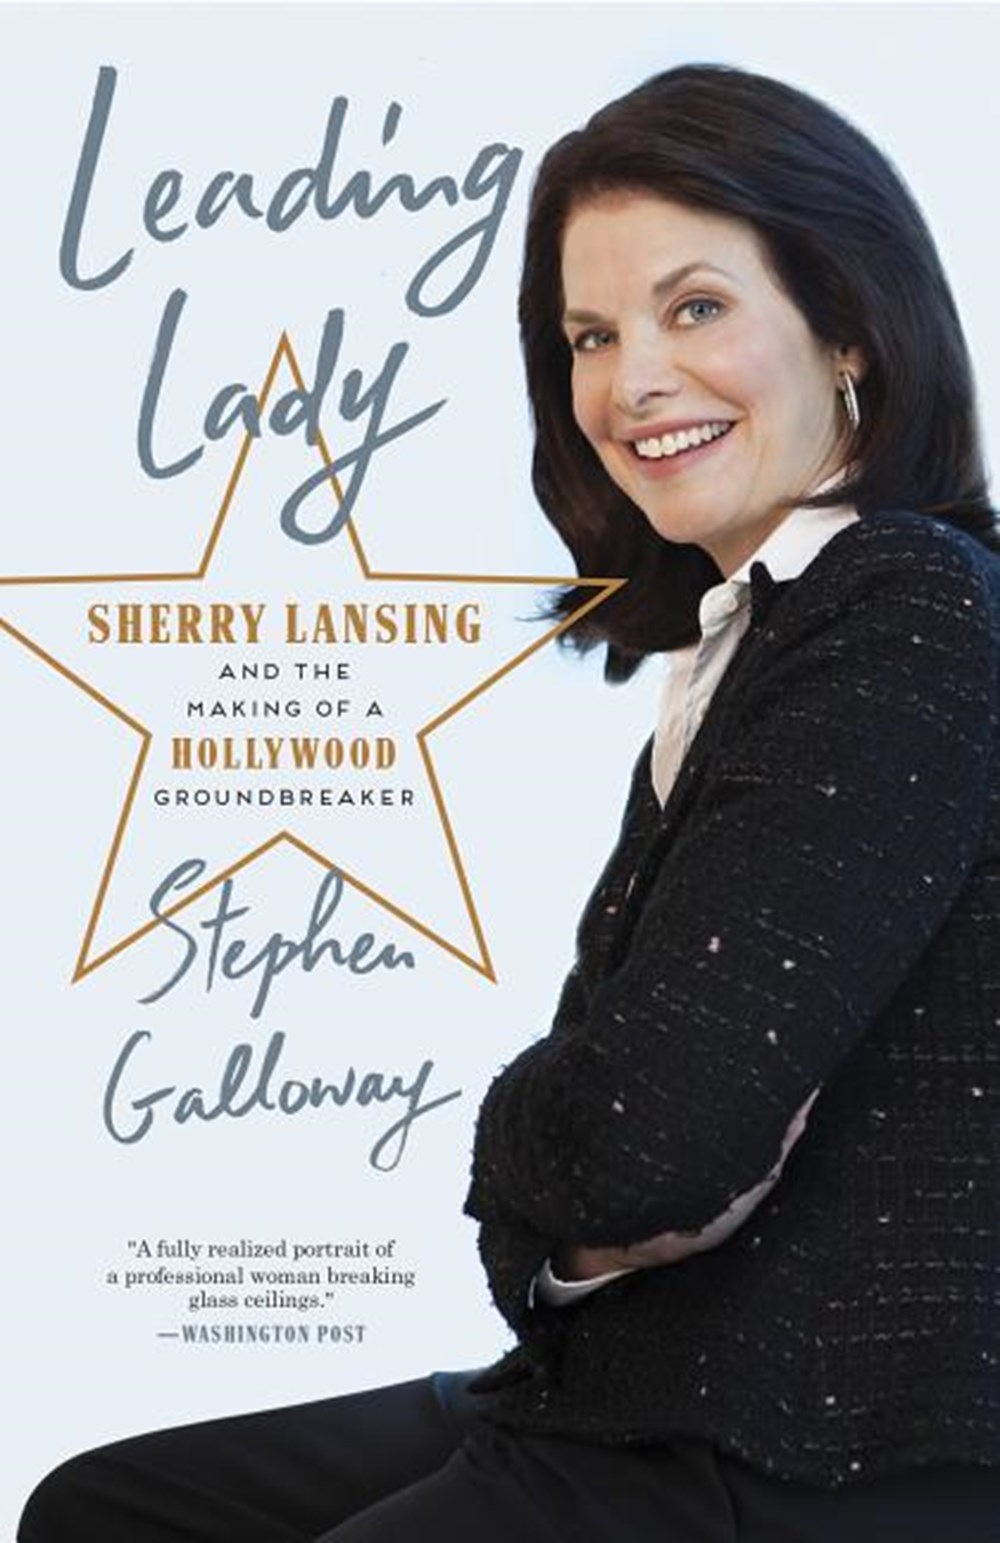 Leading Lady Sherry Lansing and the Making of a Hollywood Groundbreaker